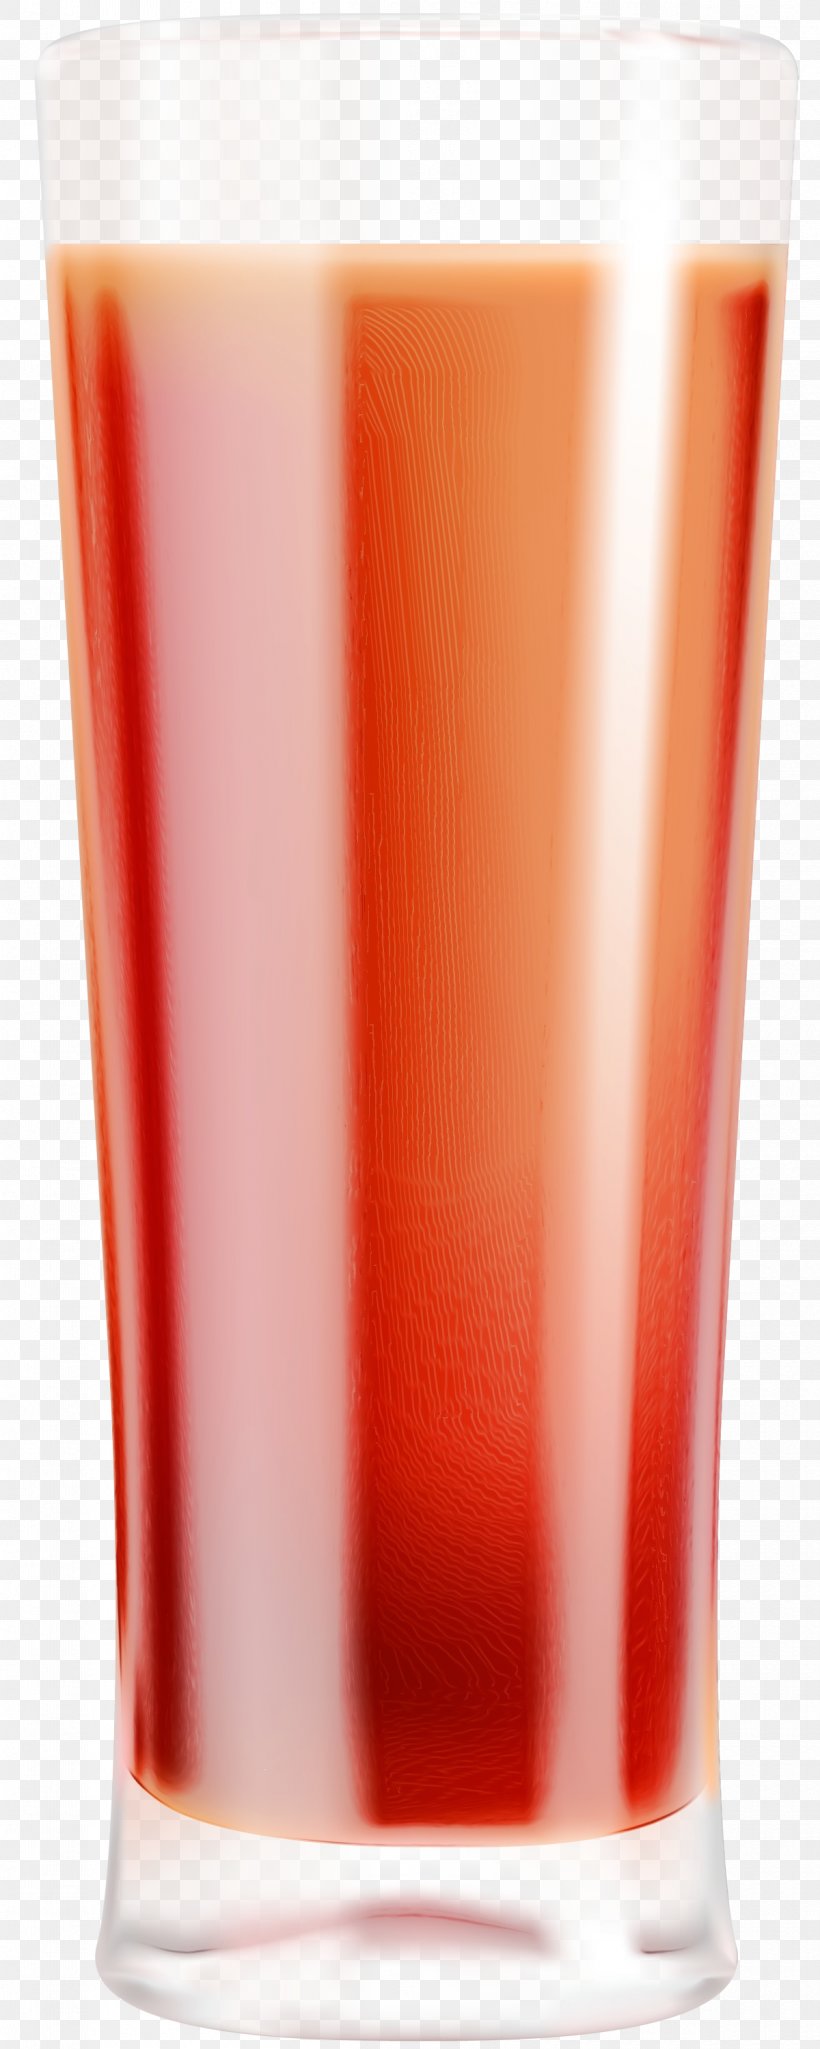 Material Property Tumbler Drinkware Cylinder Drink, PNG, 1200x2999px, Watercolor, Cylinder, Drink, Drinkware, Material Property Download Free